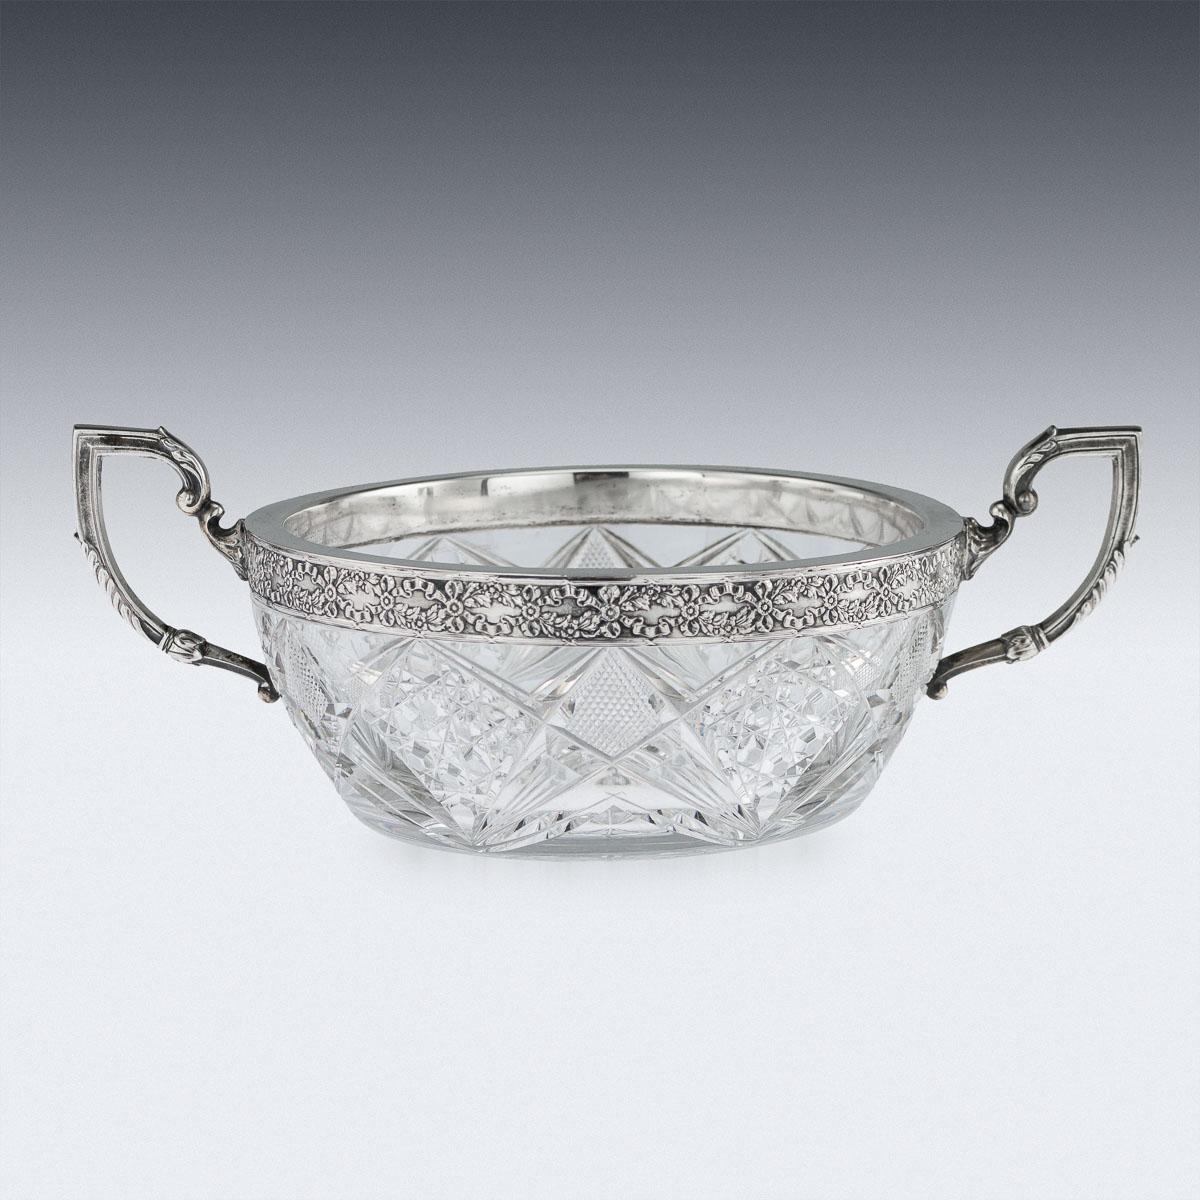 Antique early 20th century imperial Russian solid silver and cut-glass bowl, mounted with twin leaf capped handles, the boarder decorated with flowers, laurels and ribbons. Hallmarked Russian 84 silver (875 standard), St-Petersburg, year 1915-1917,